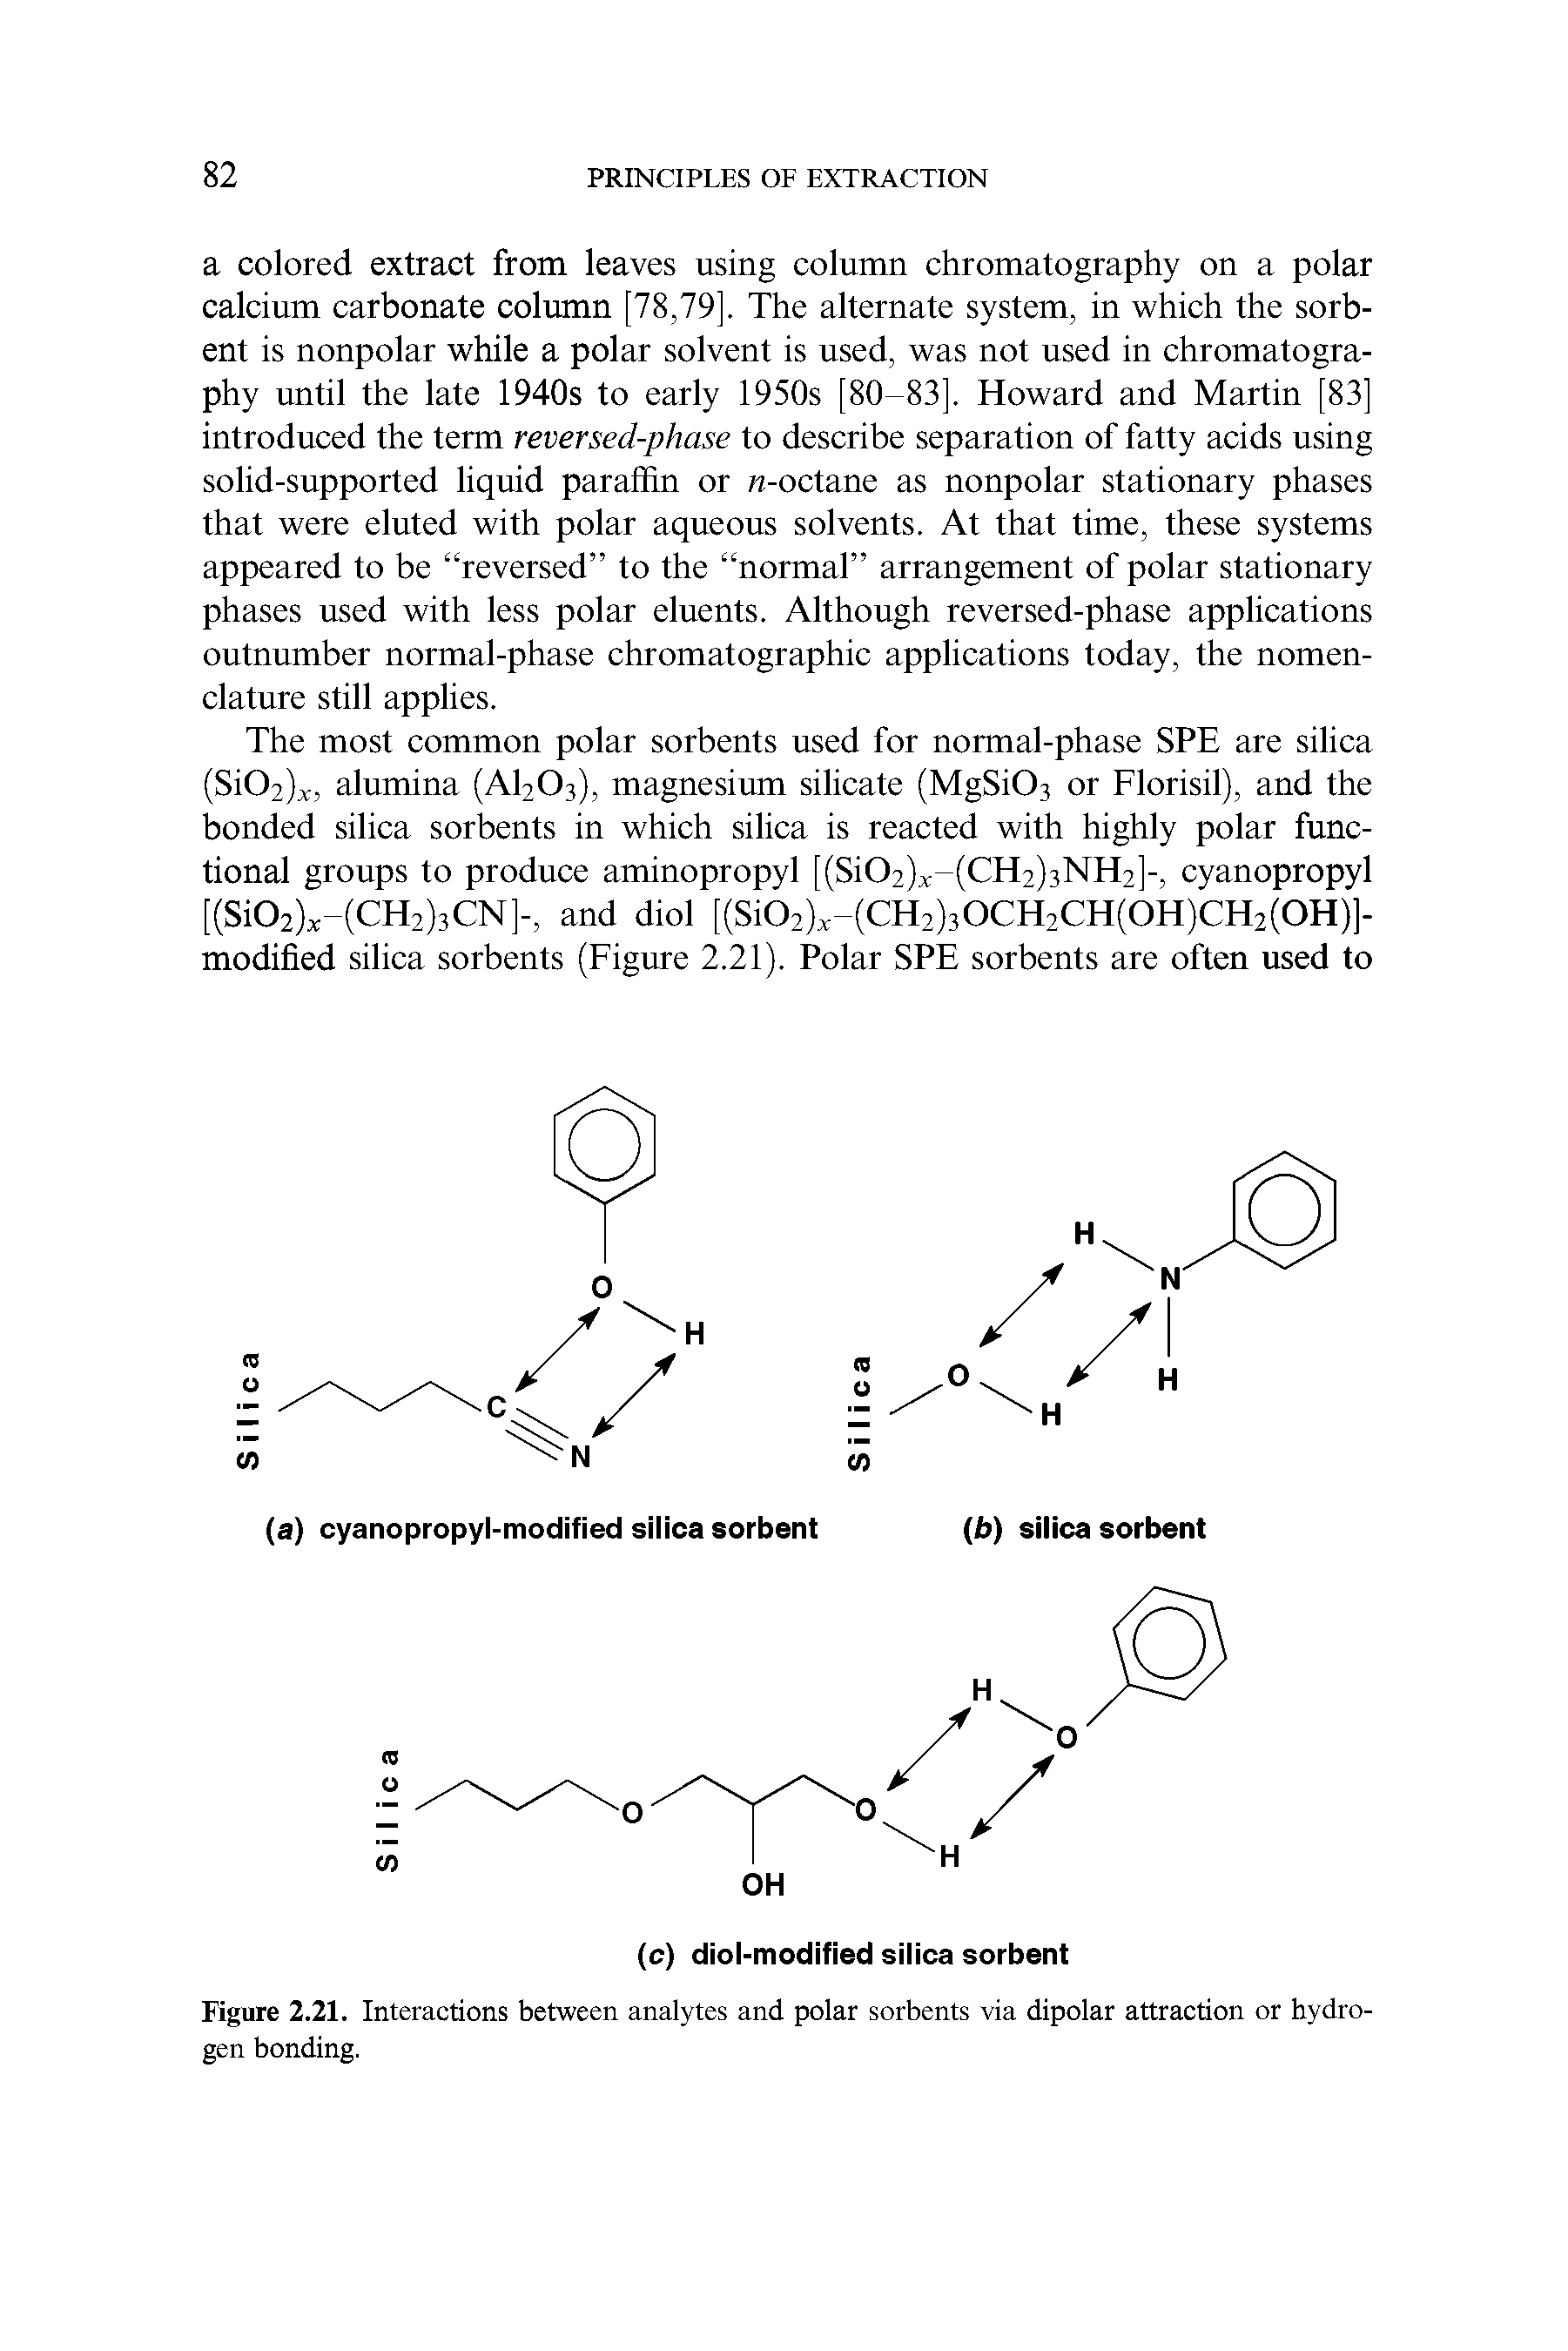 Figure 2.21. Interactions between analytes and polar sorbents via dipolar attraction or hydrogen bonding.